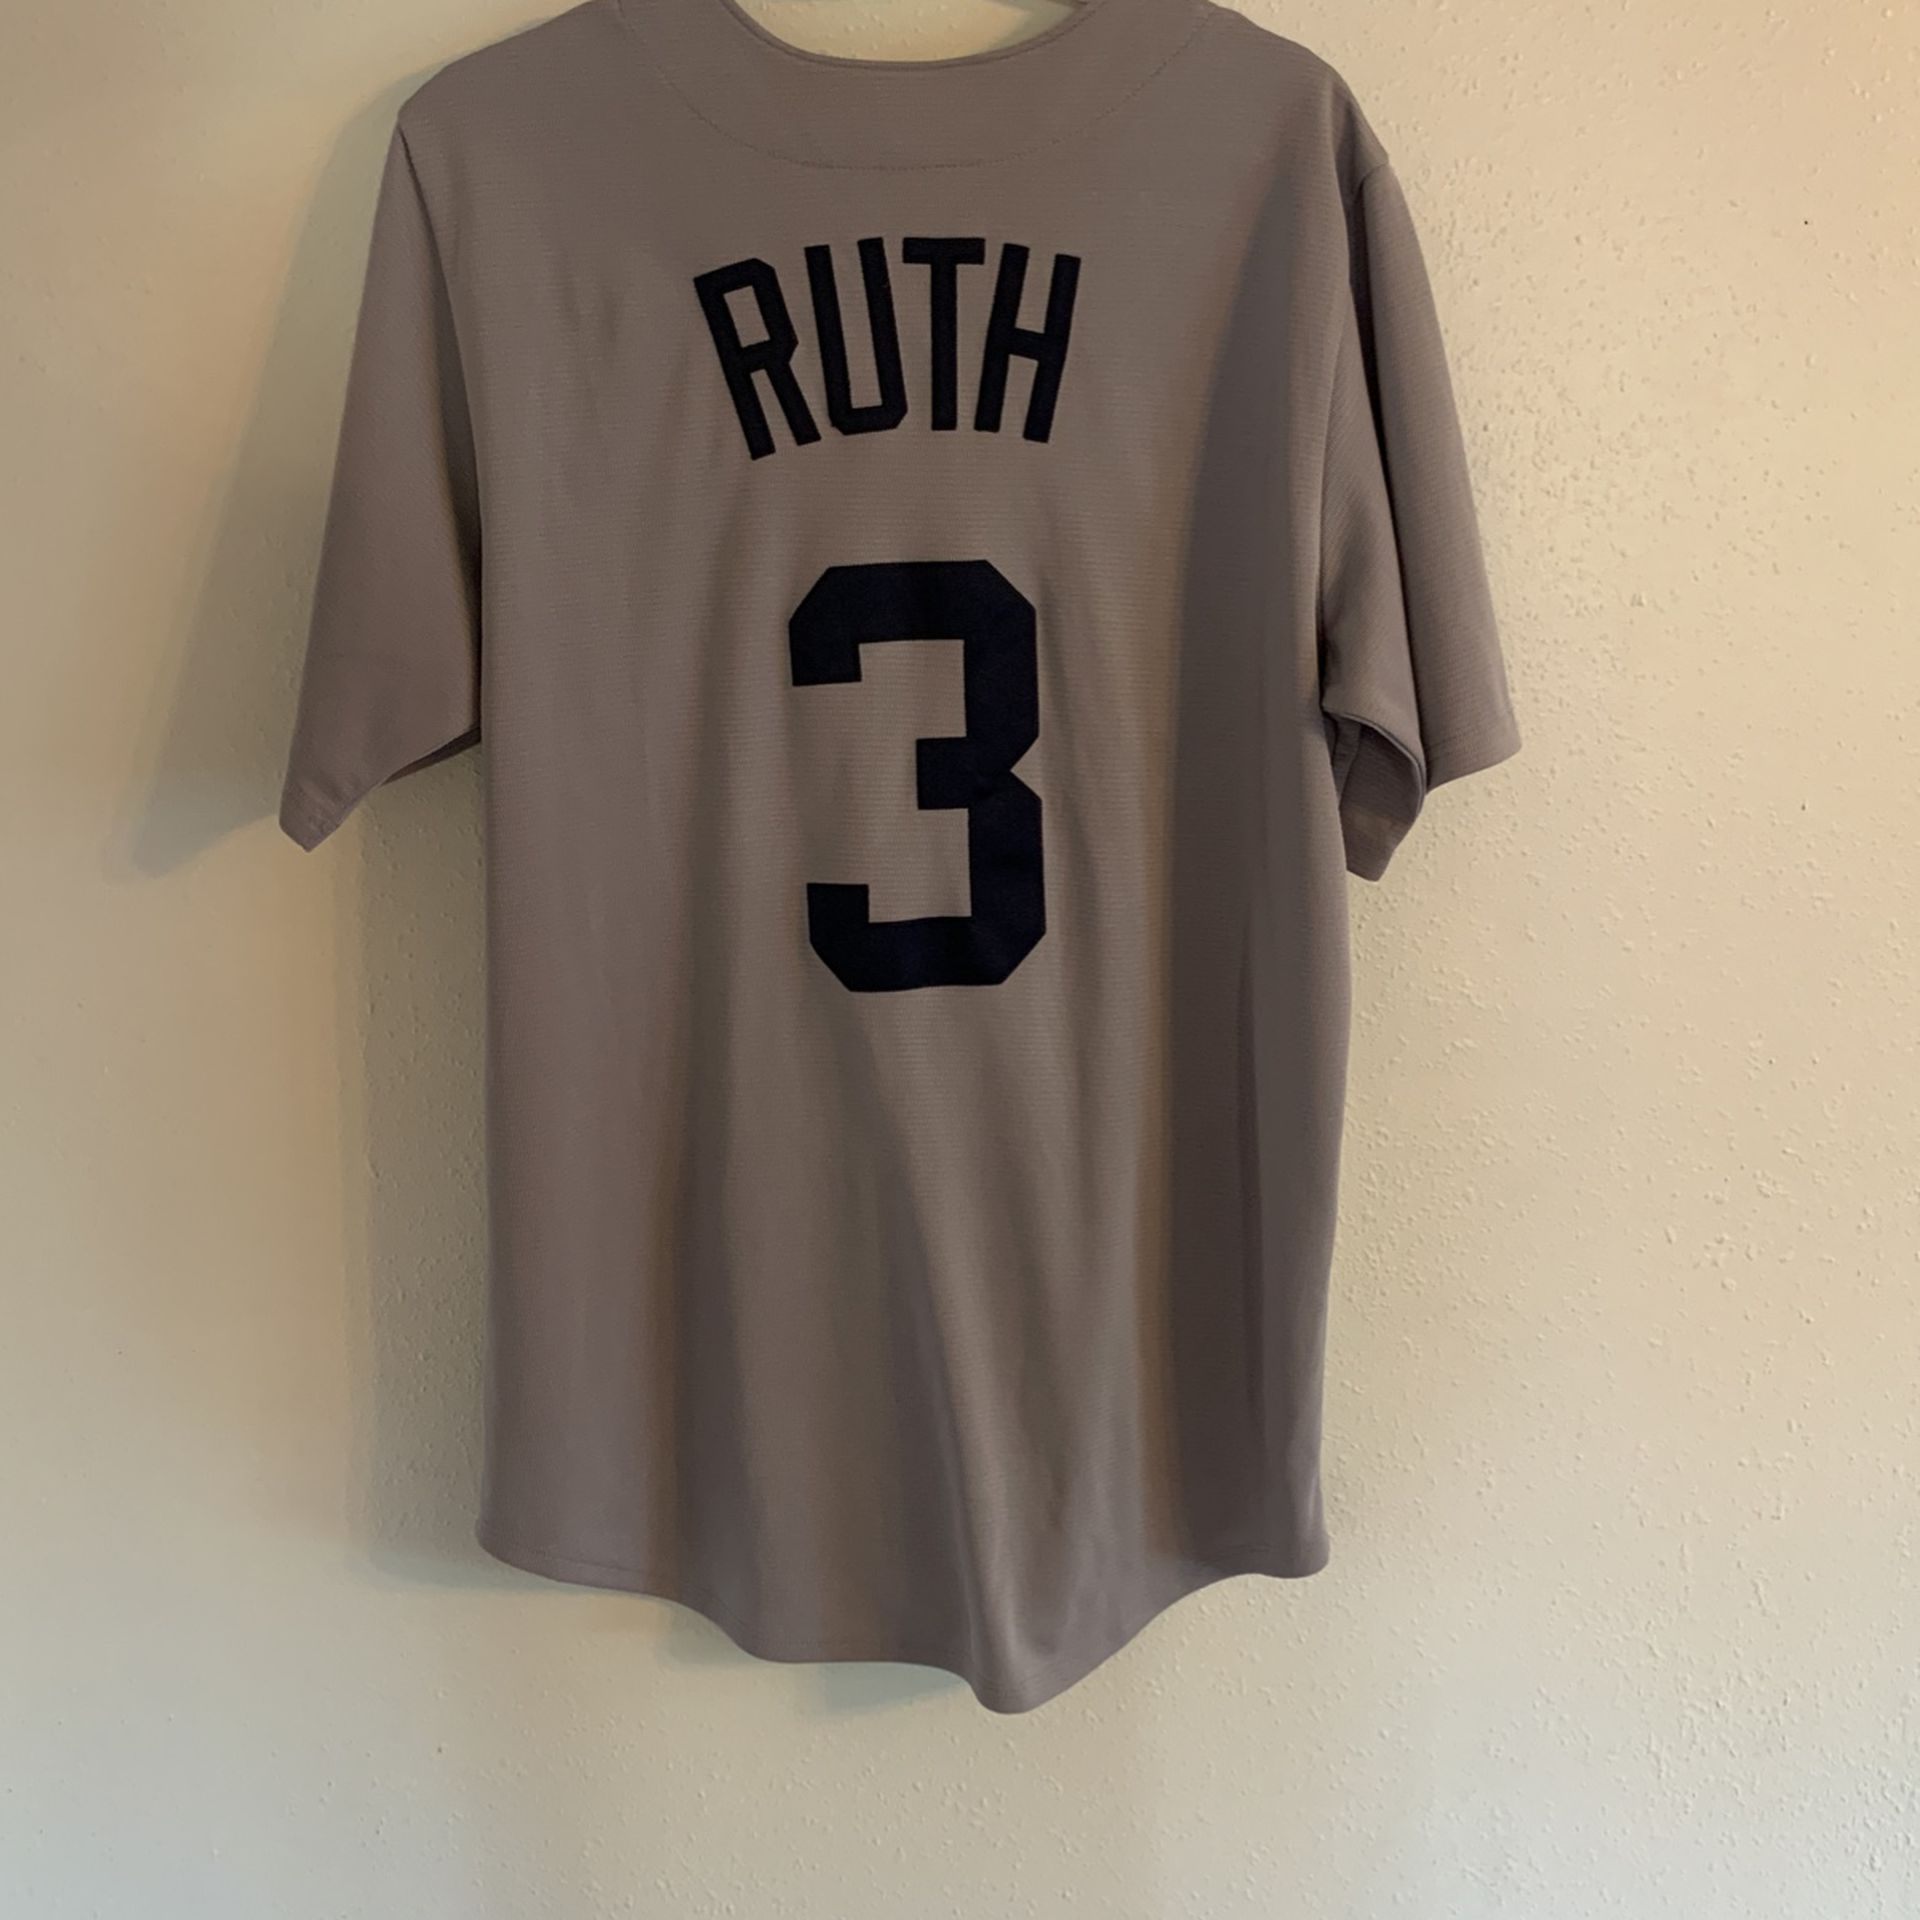 New York Yankees Babe Ruth Jersey for Sale in Tacoma, WA - OfferUp